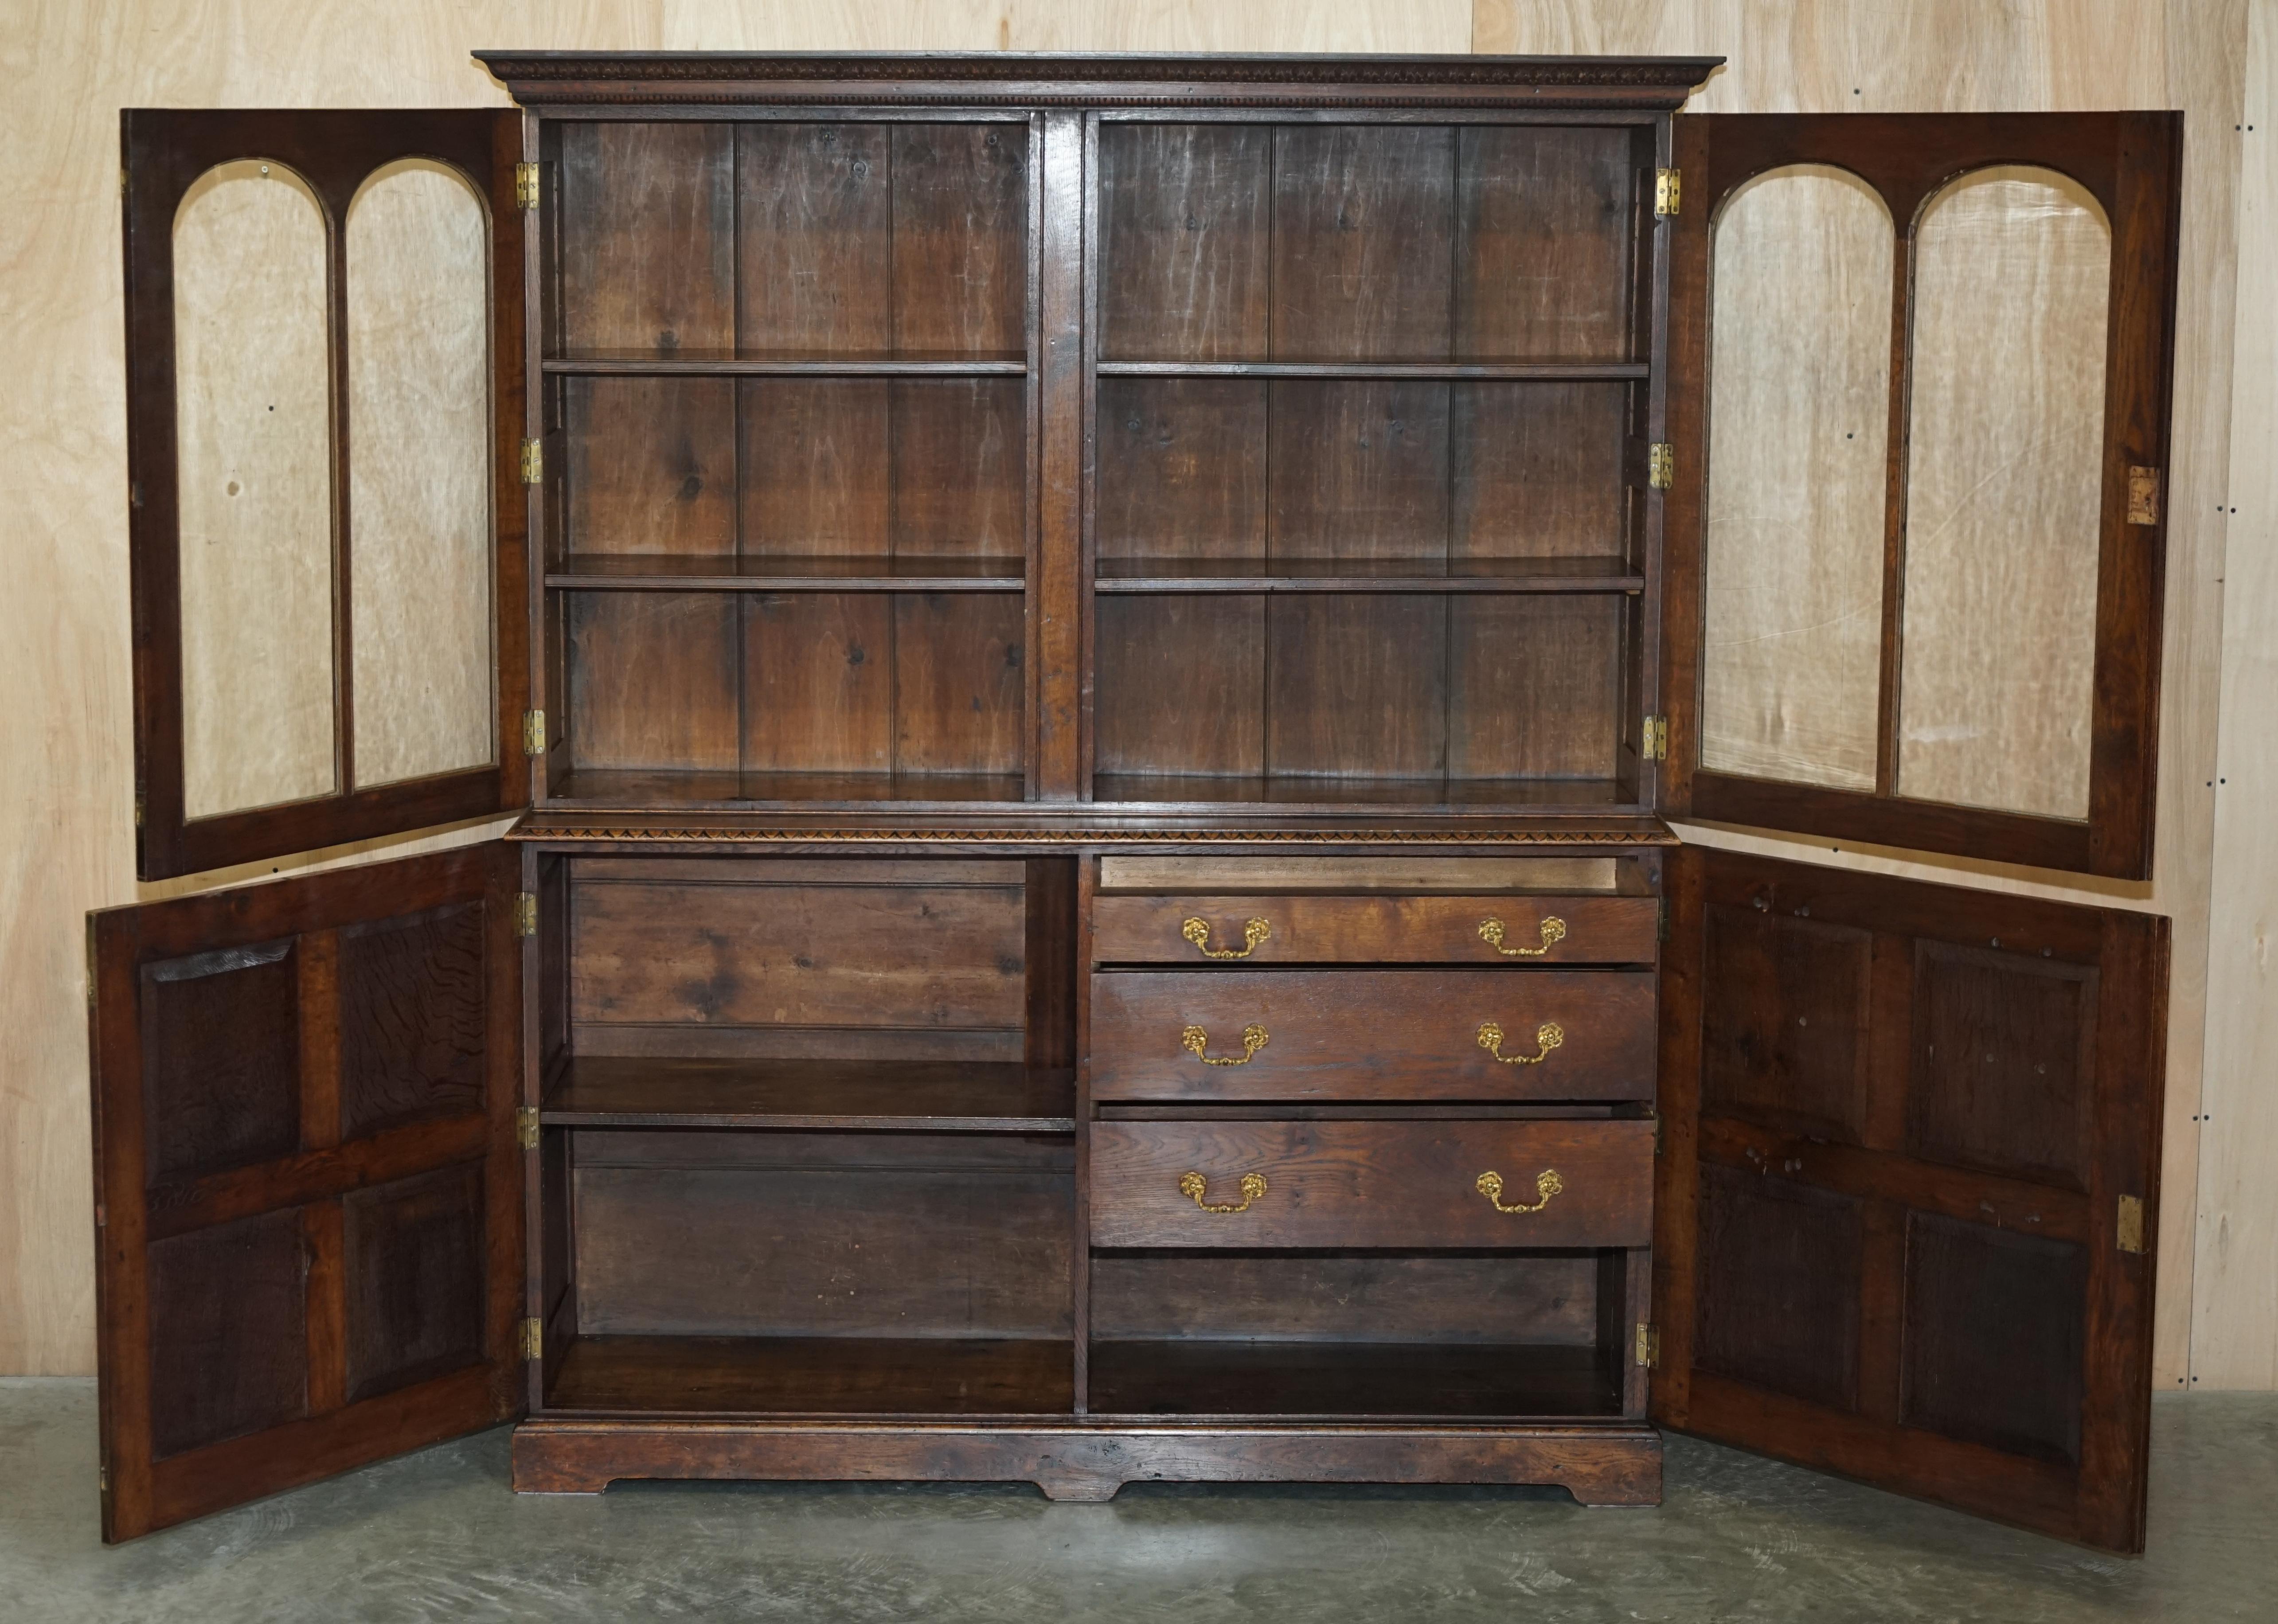 IMPORTANT CARVED BOOKCASE CABiNET FROM THE BATE COLLECTION IN OXFORD UNIVERSITY For Sale 11